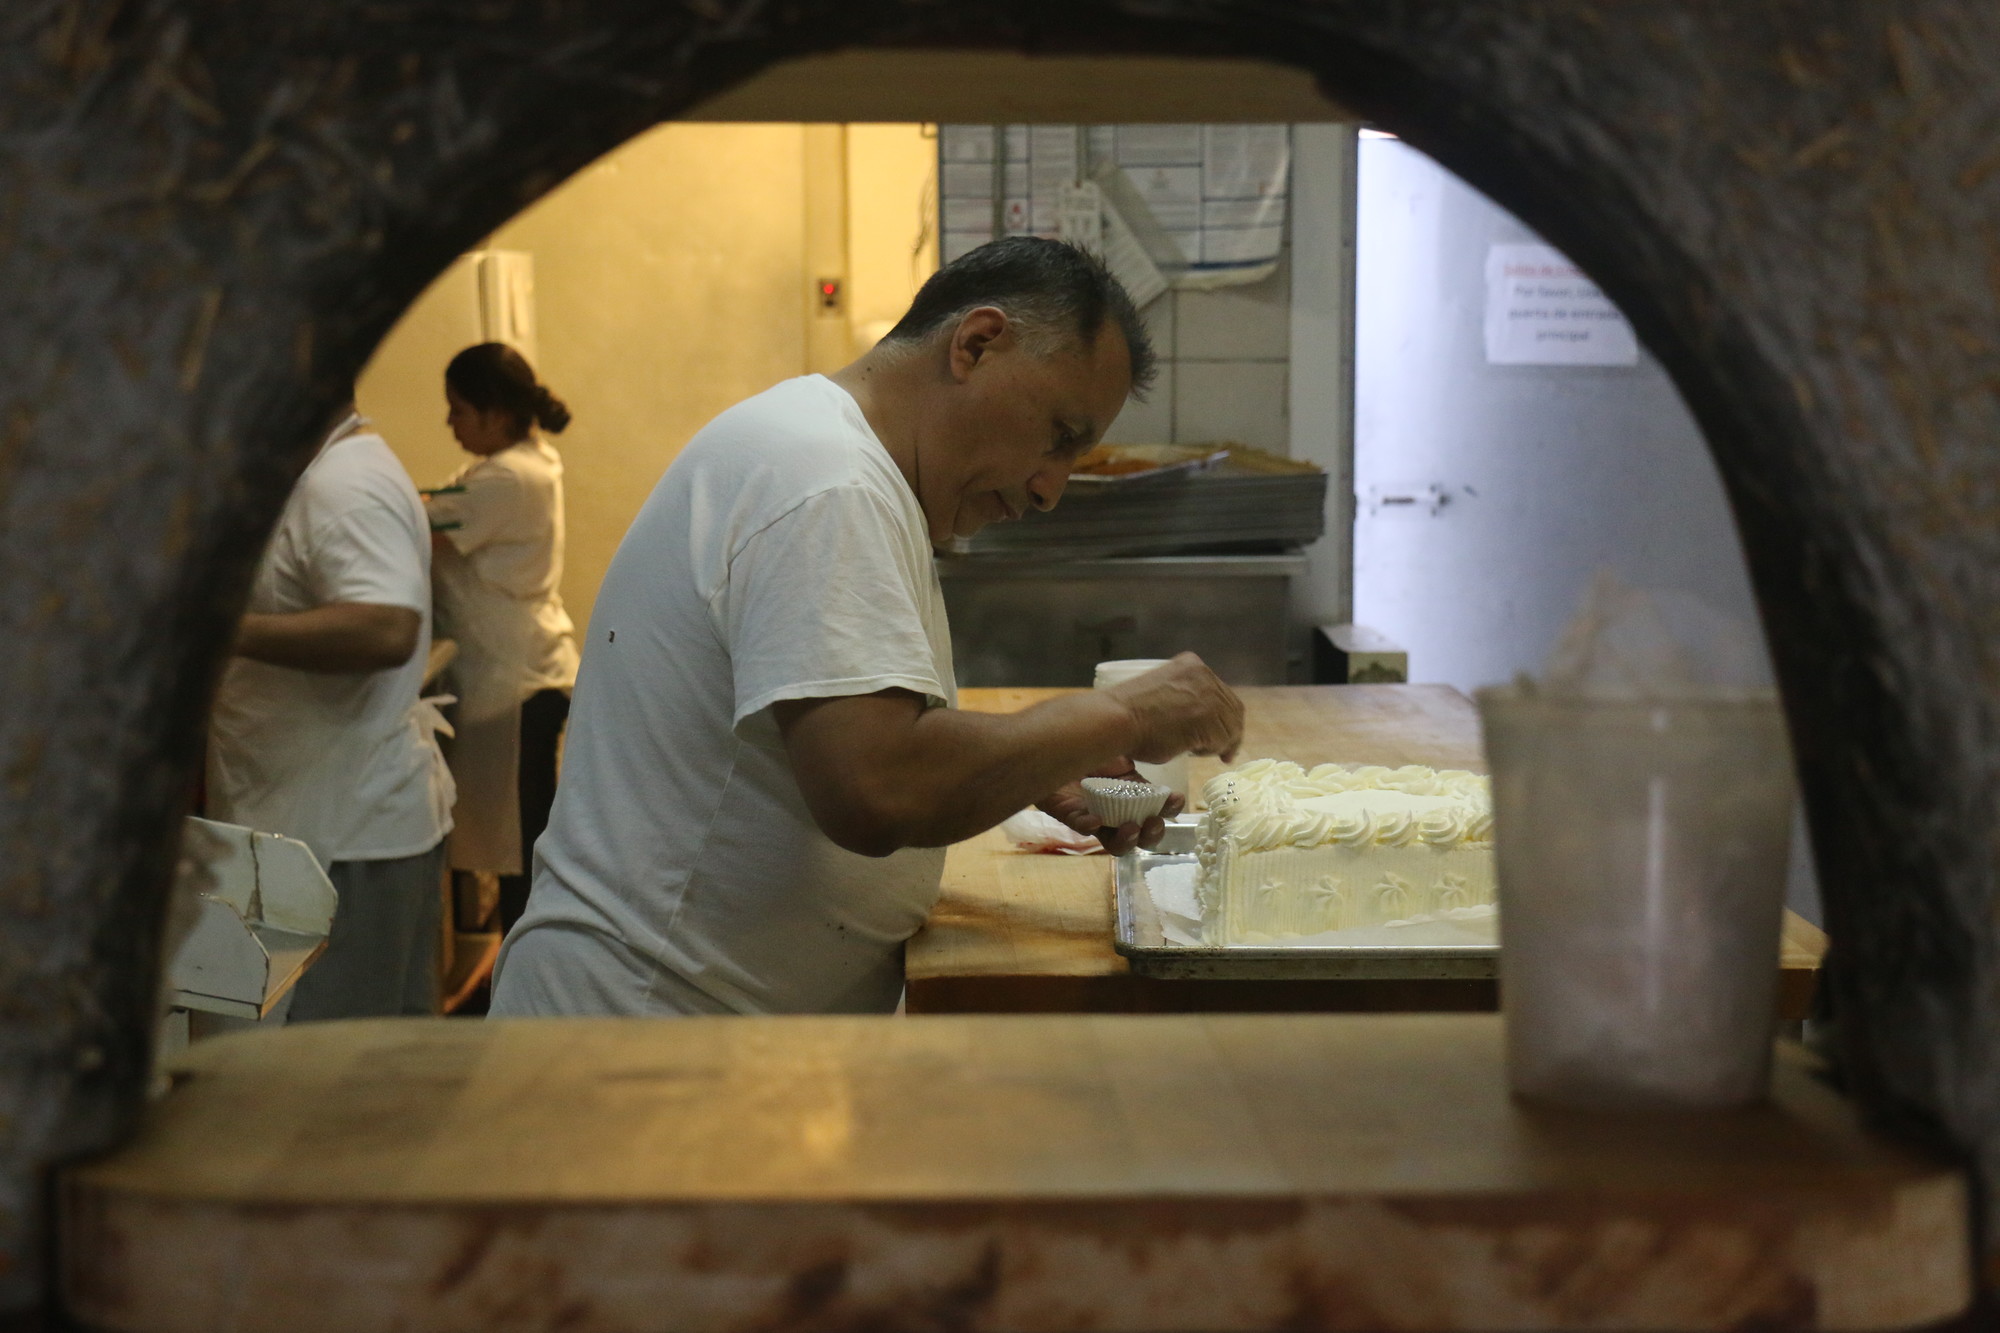 Owner Juanito Acevedo put the finishing touches on a cake.